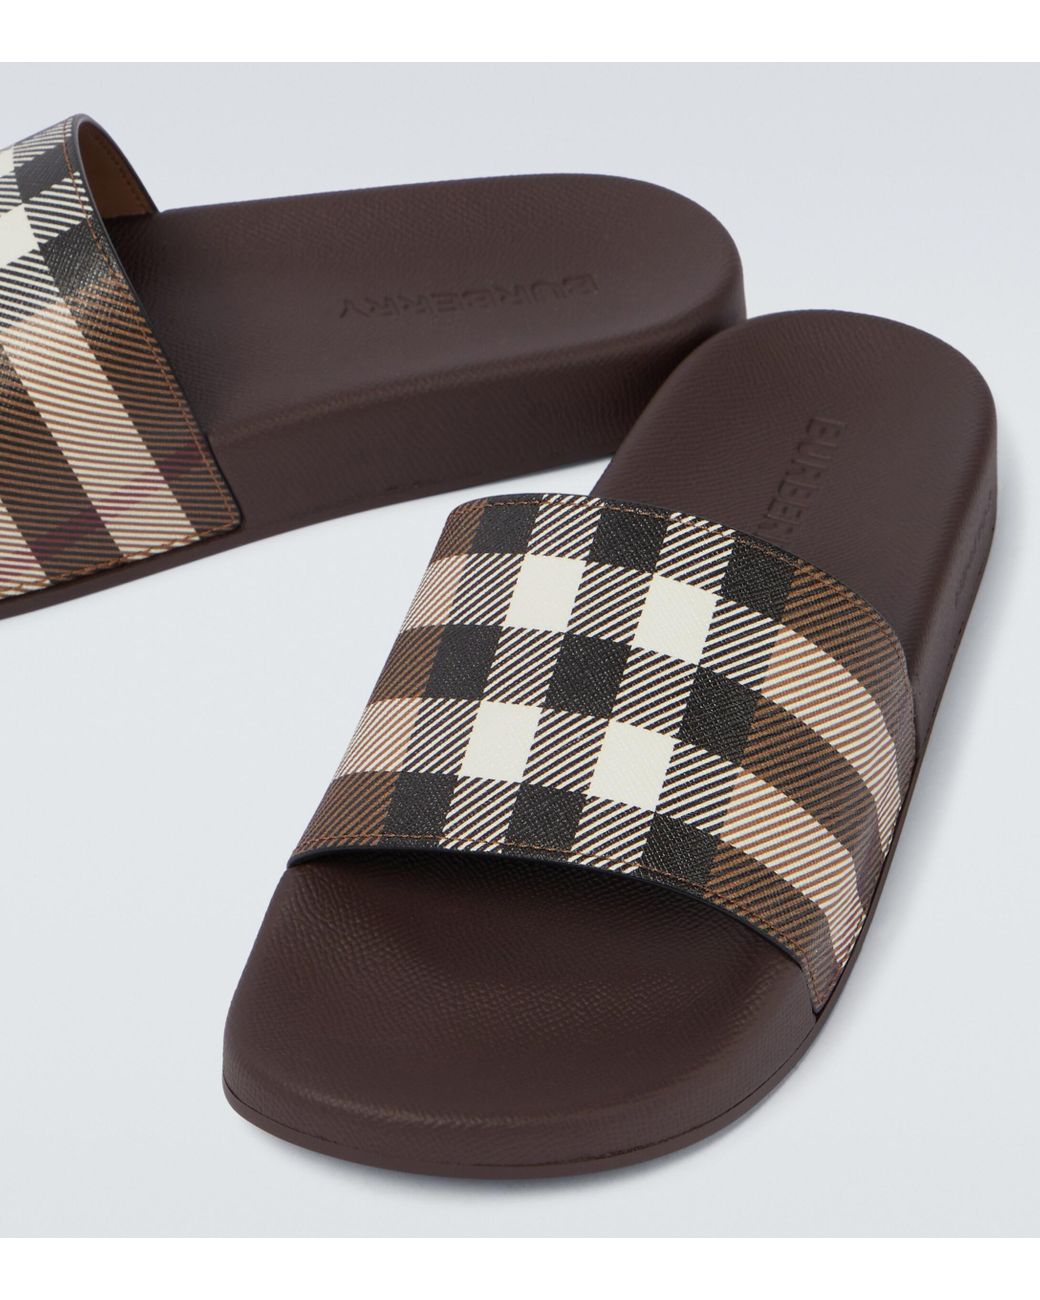 Burberry Rubber Vintage Checked Slides in Brown for Men - Lyst